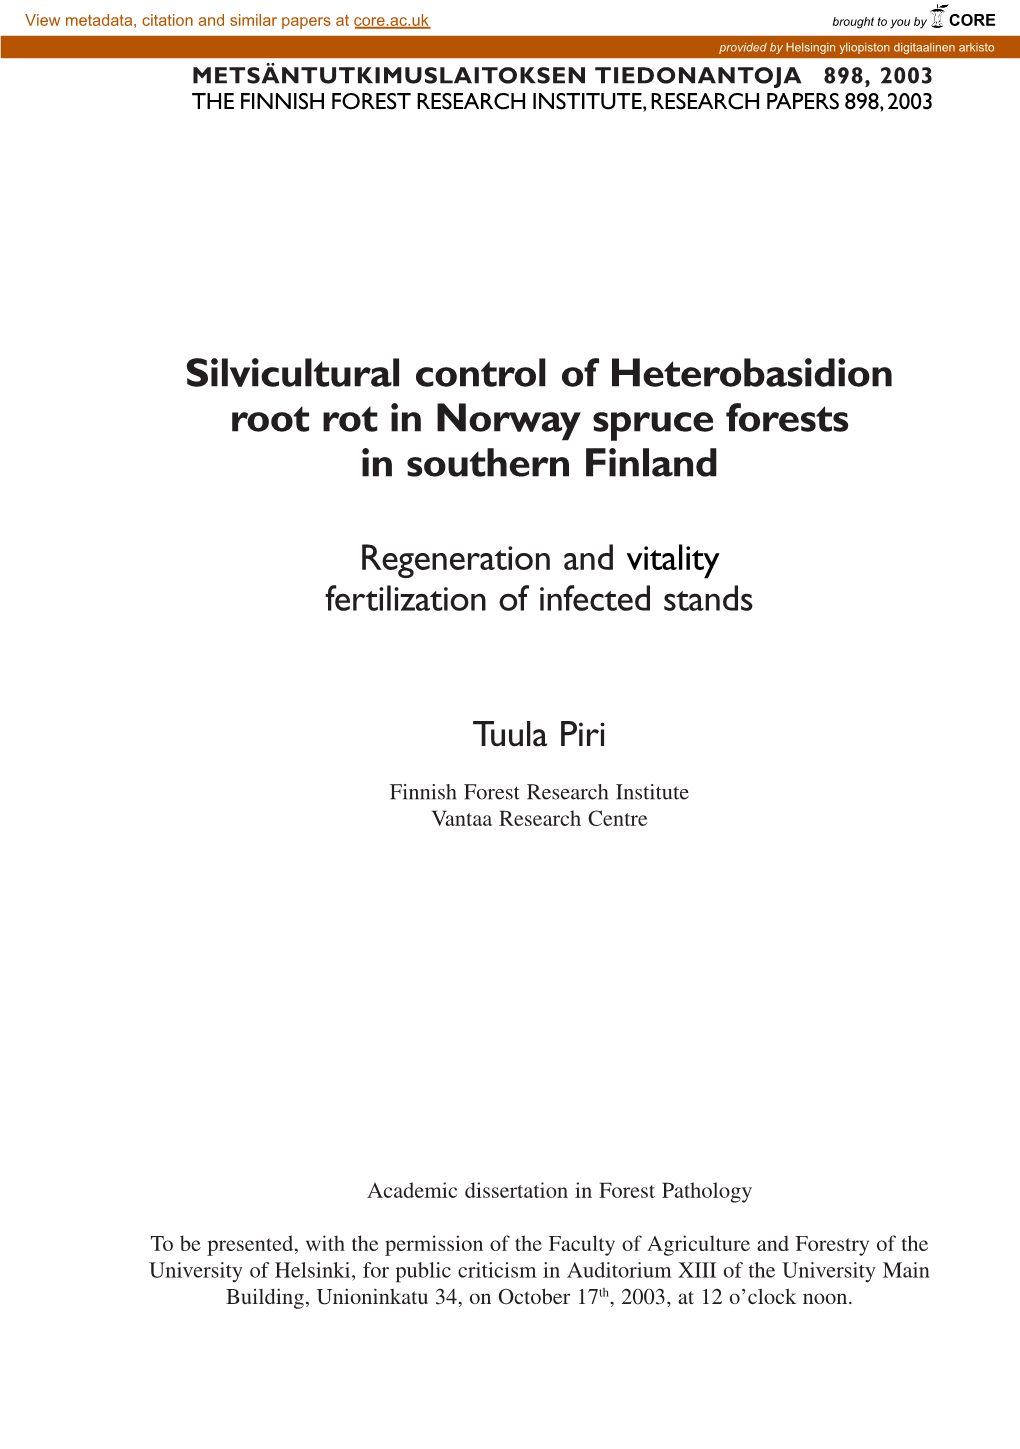 Silvicultural Control of Heterobasidion Root Rot in Norway Spruce Forests in Southern Finland